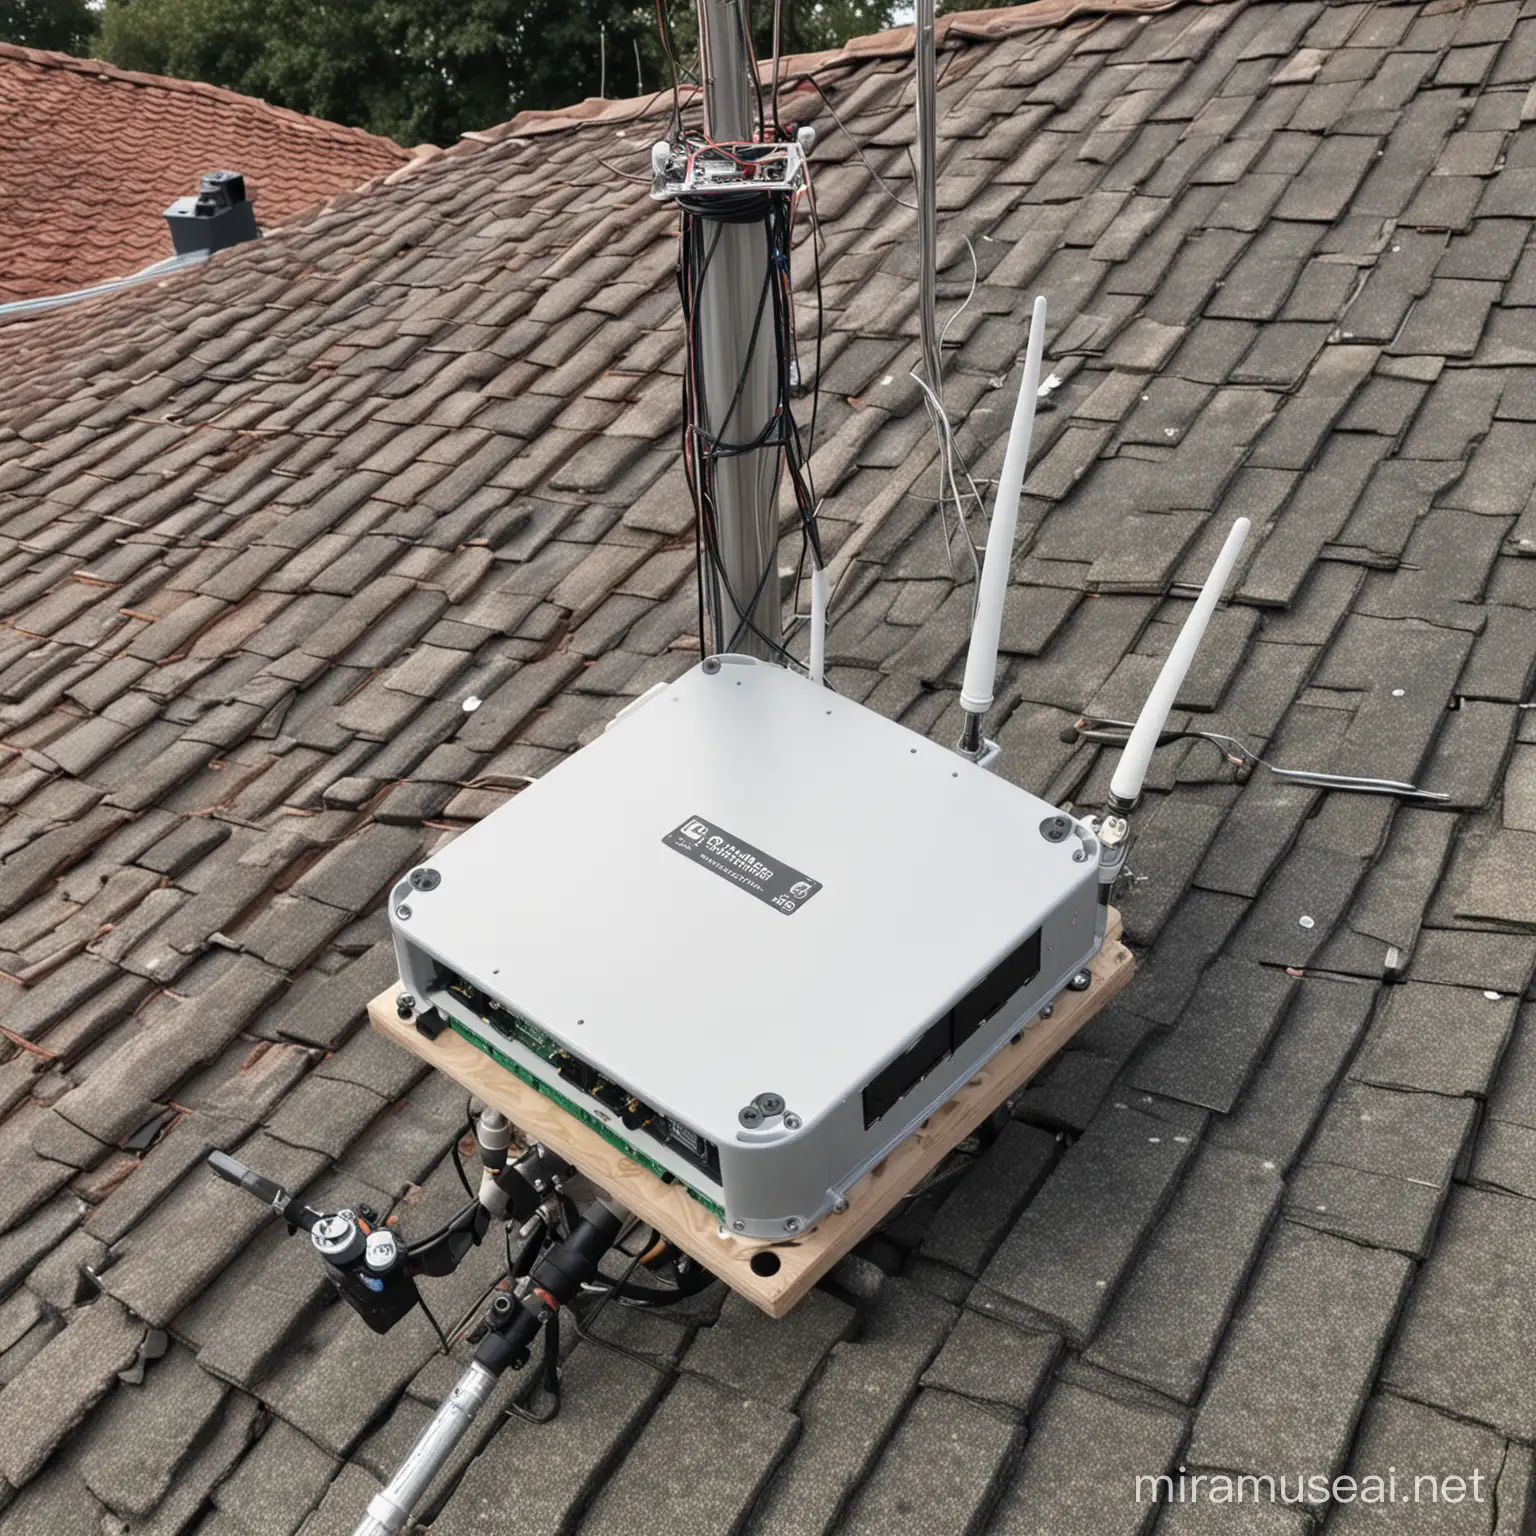 HighSpeed Omni WiFi Antenna Setup on Roof Pole with Routerboard R433 Enclosure